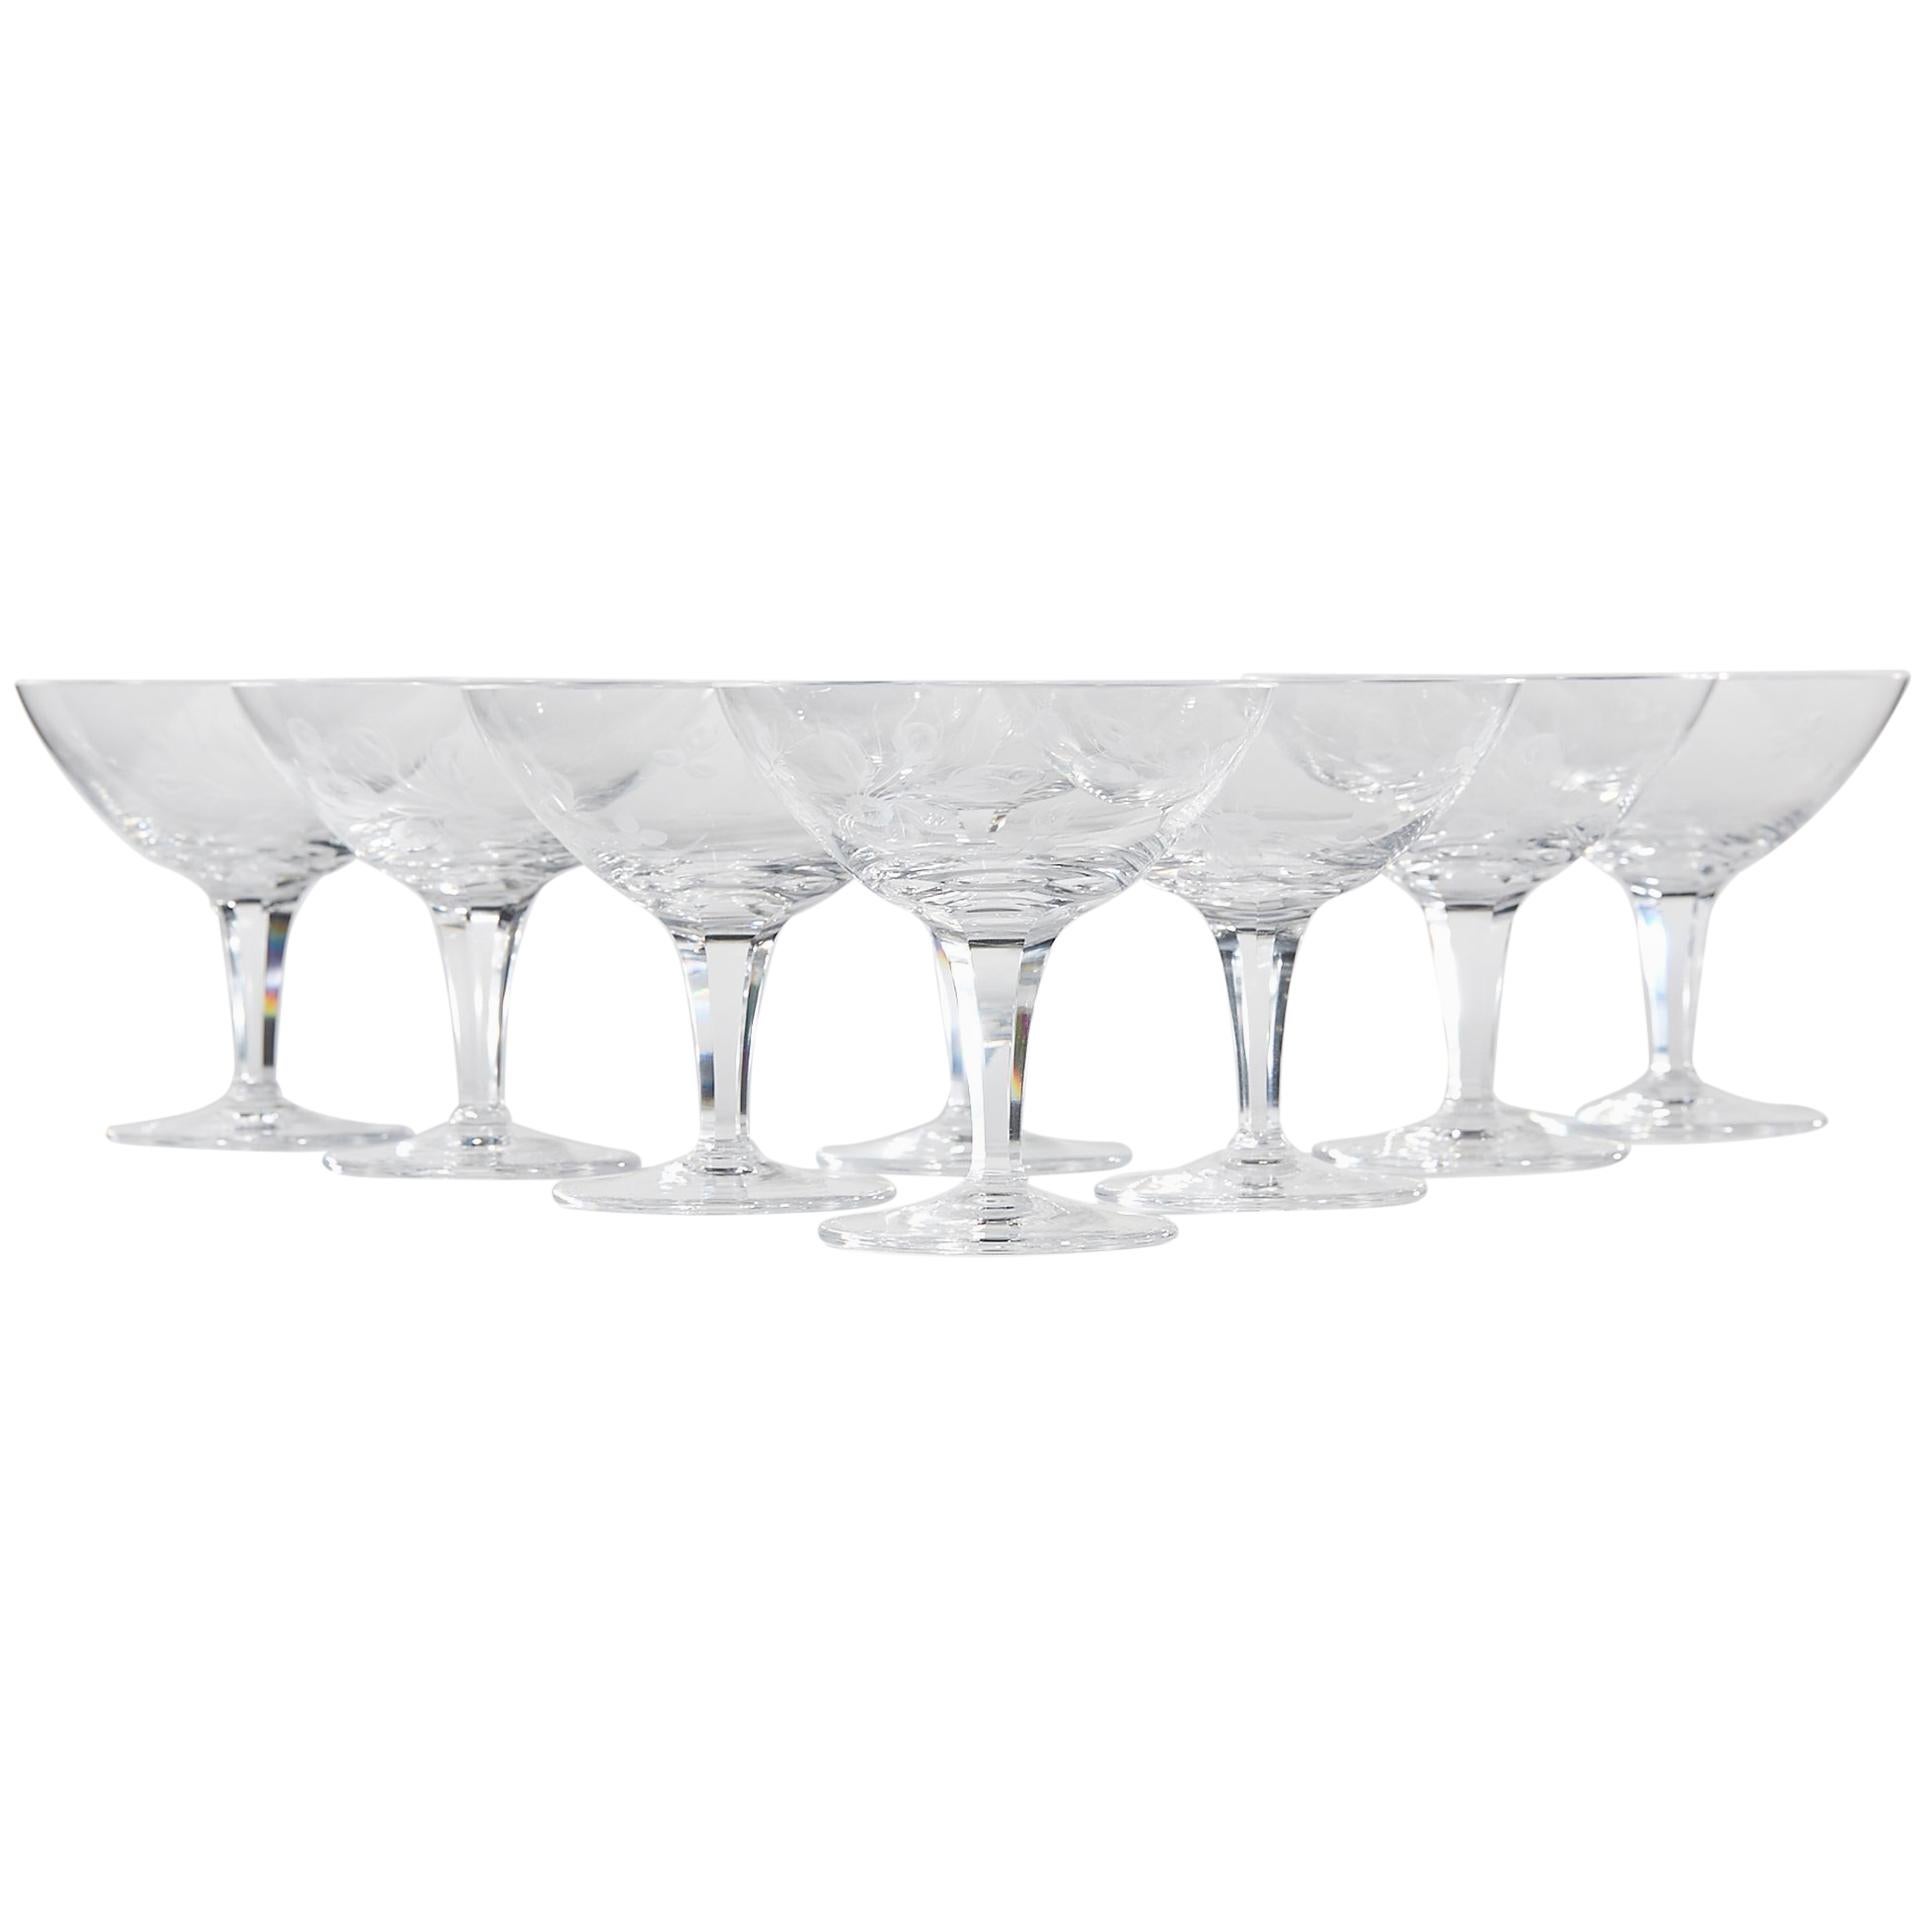 1960s Rosenthal Parisian Spring Glass Coupes, Set of 8